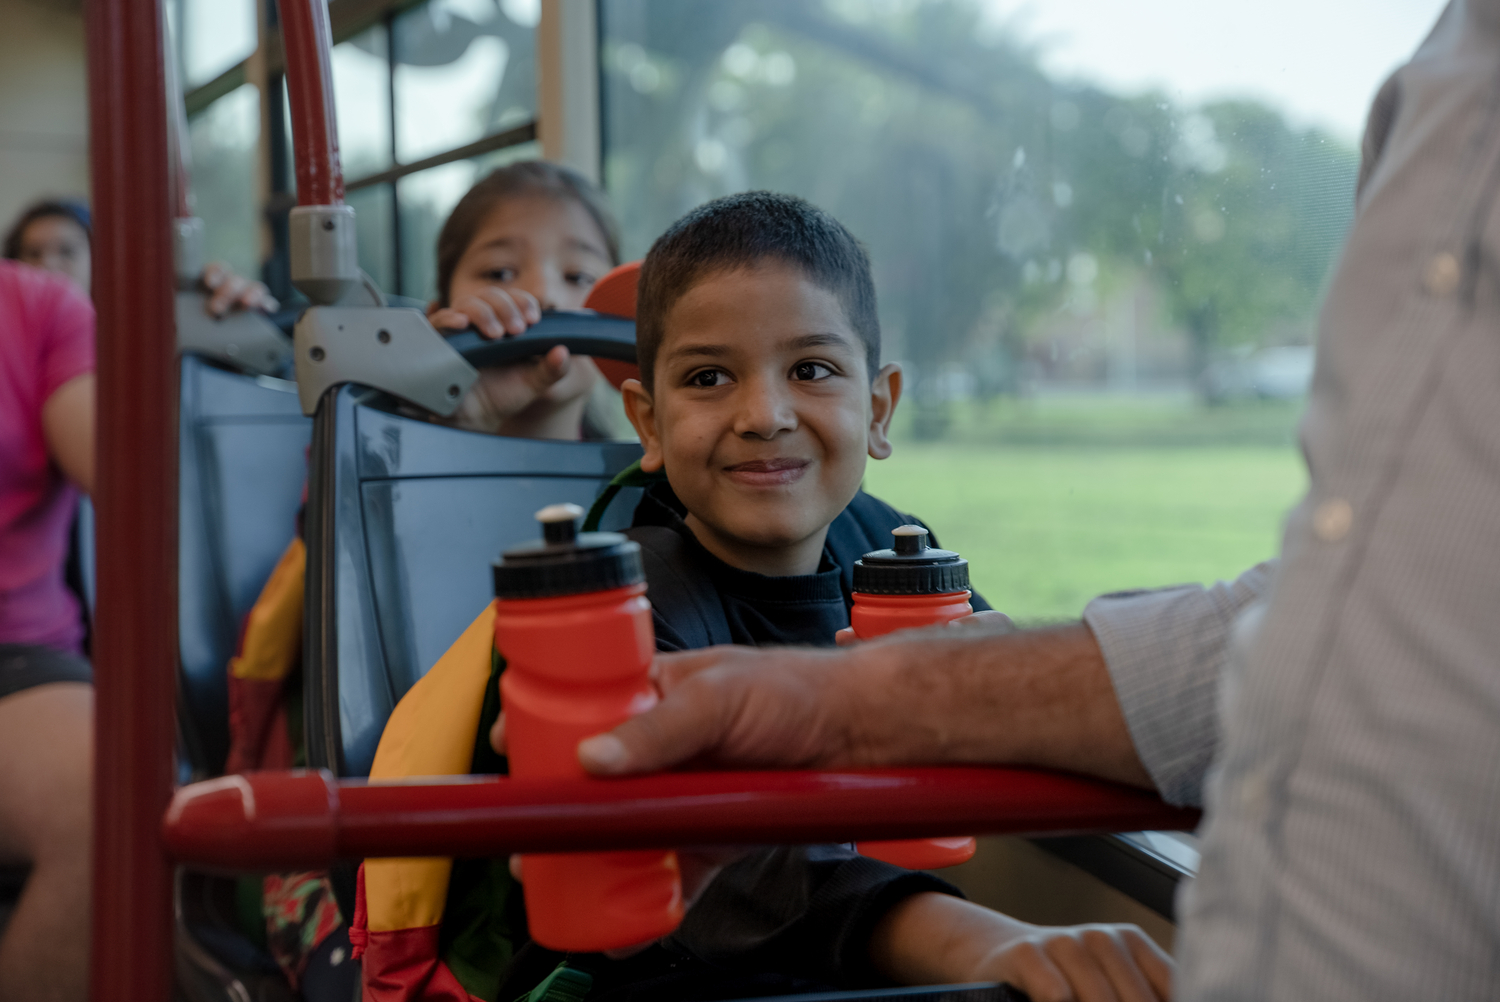 A boy smiles while sitting on a bus holding a water bottle.